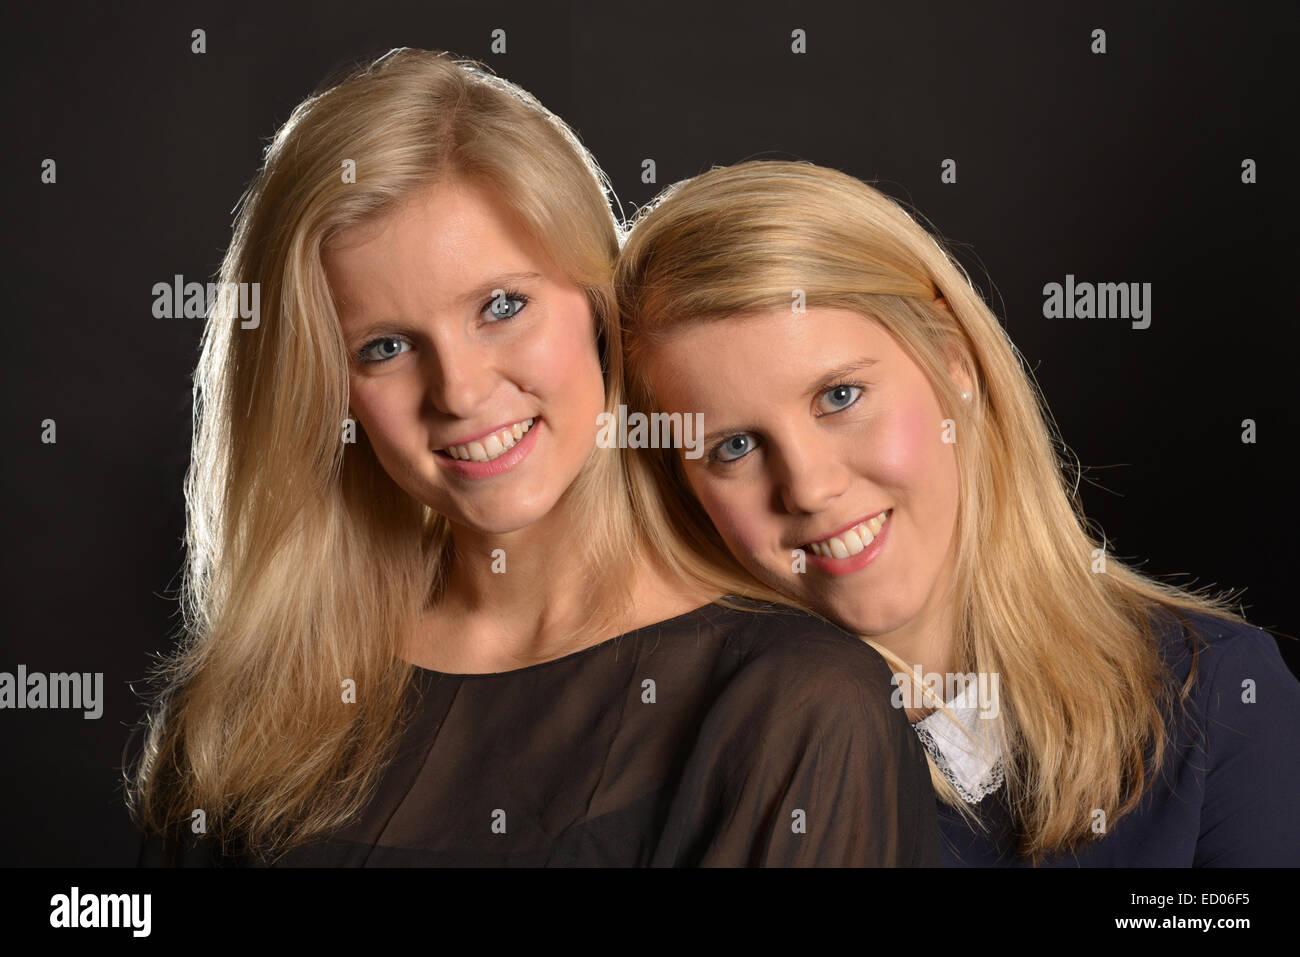 Studio portrait of a young blonde sisters (20's) Stock Photo